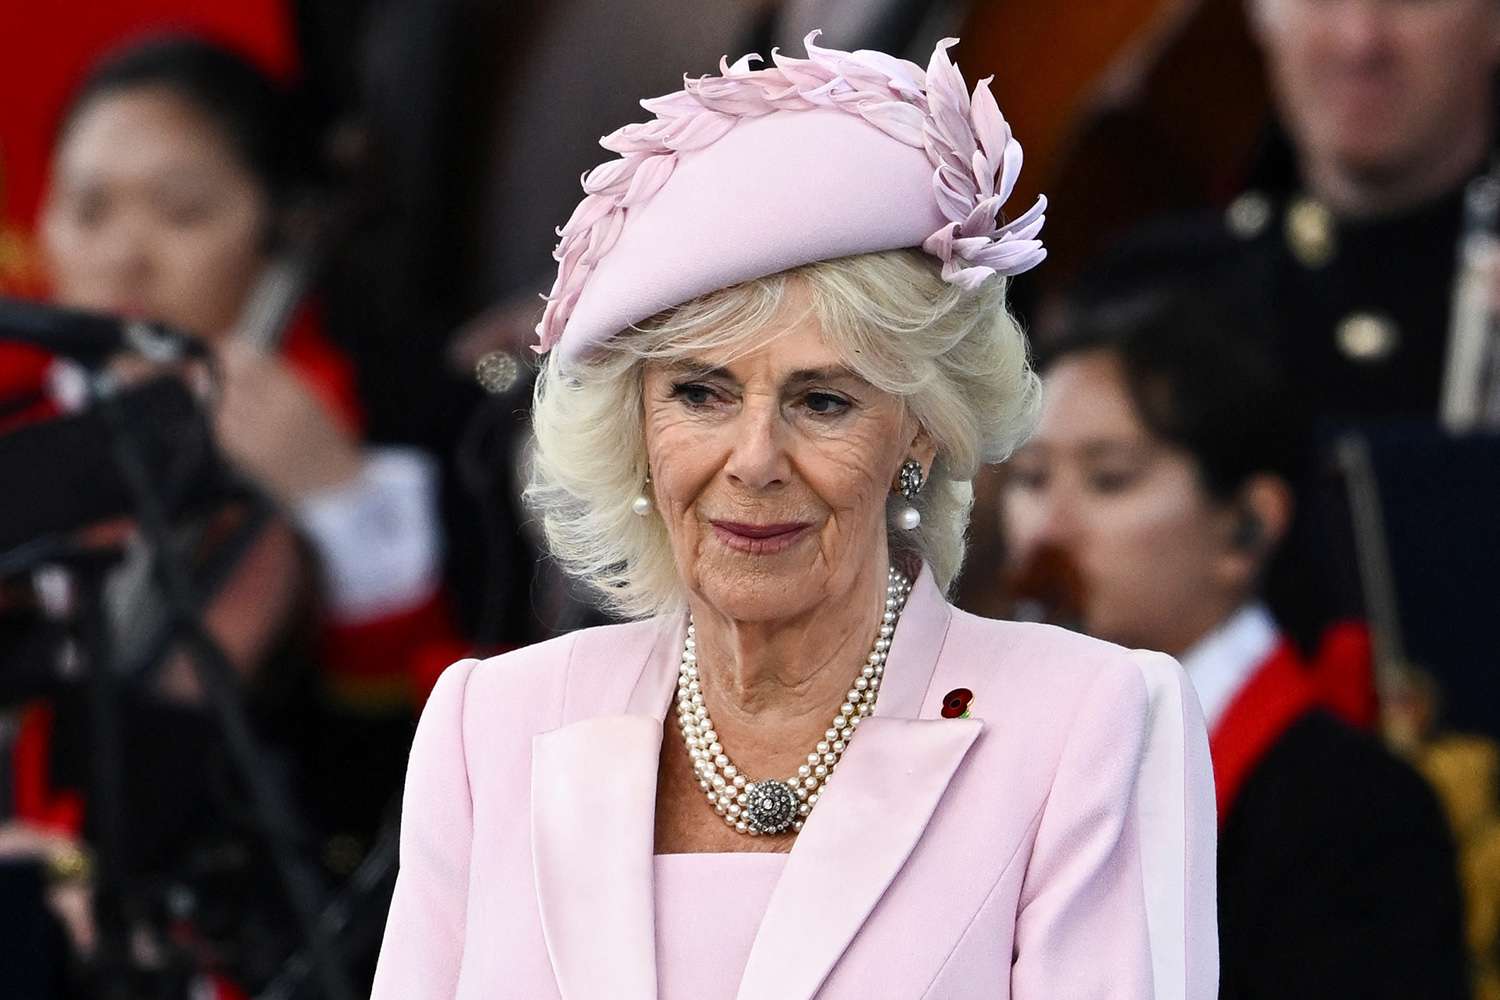 Why Did Queen Camilla Wear Pink to Emotional D-Day Anniversary Event?